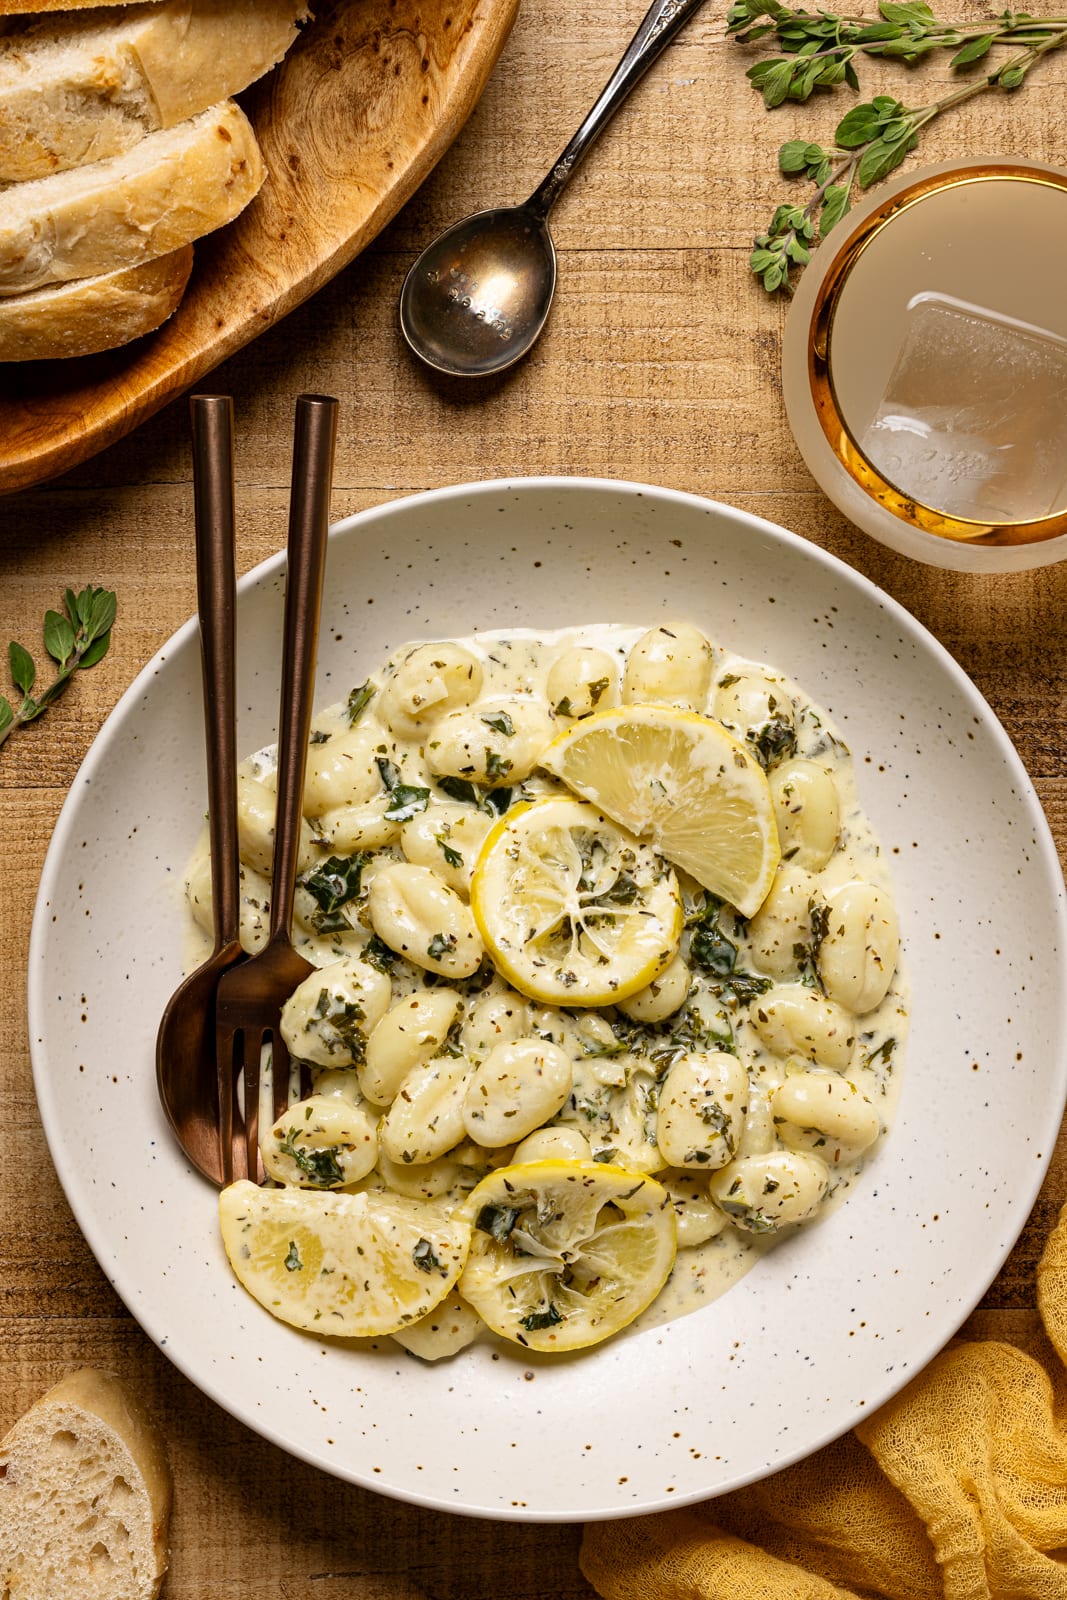 The best herb butter gnocchi in a white plate with fork + spoon, side of bread, drink, and lemons.